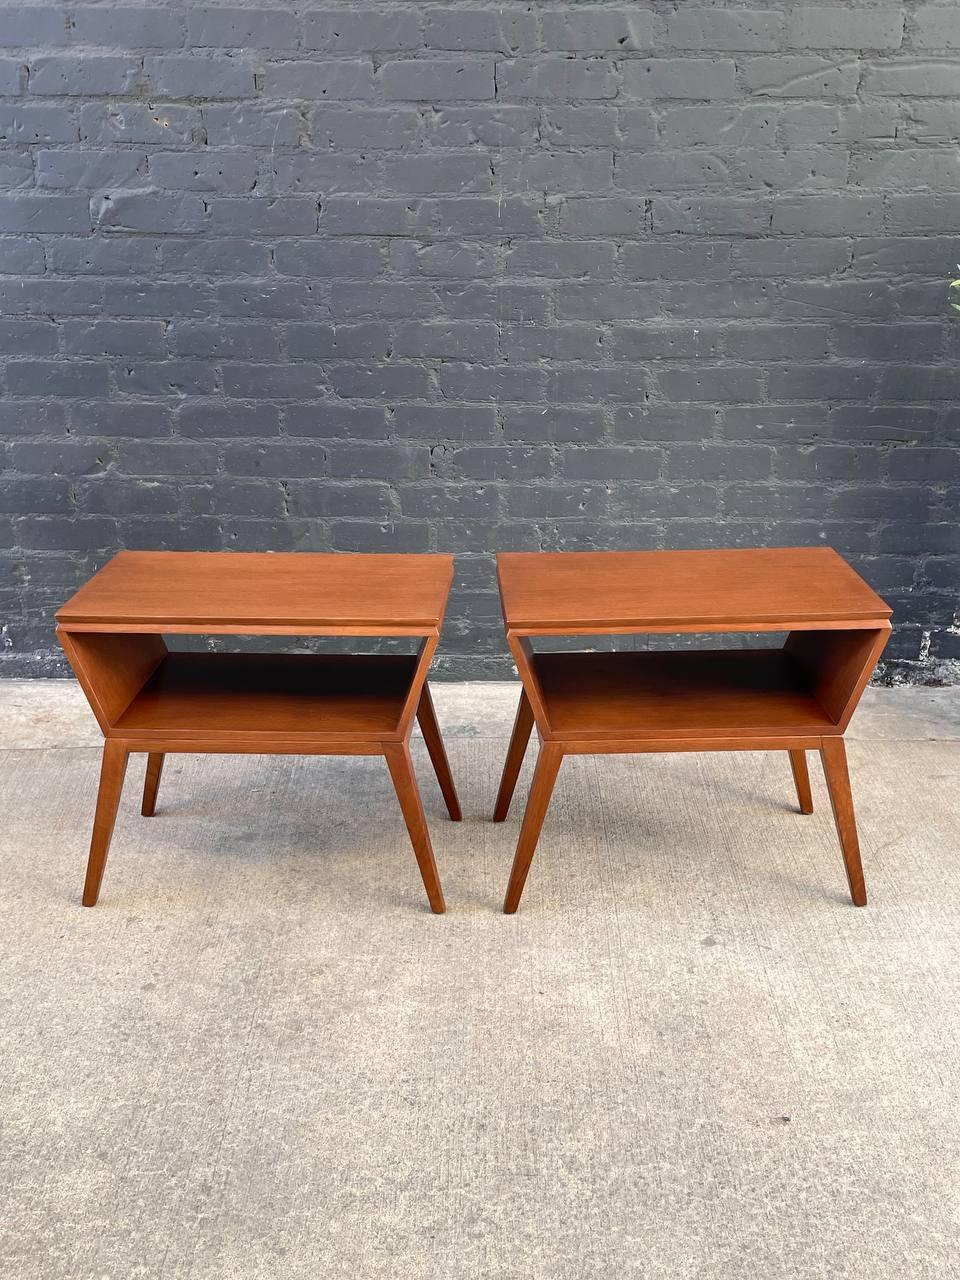 Newly Refinished - Pair of Mid-Century Modern Bookshelf Side Tables In Excellent Condition For Sale In Los Angeles, CA